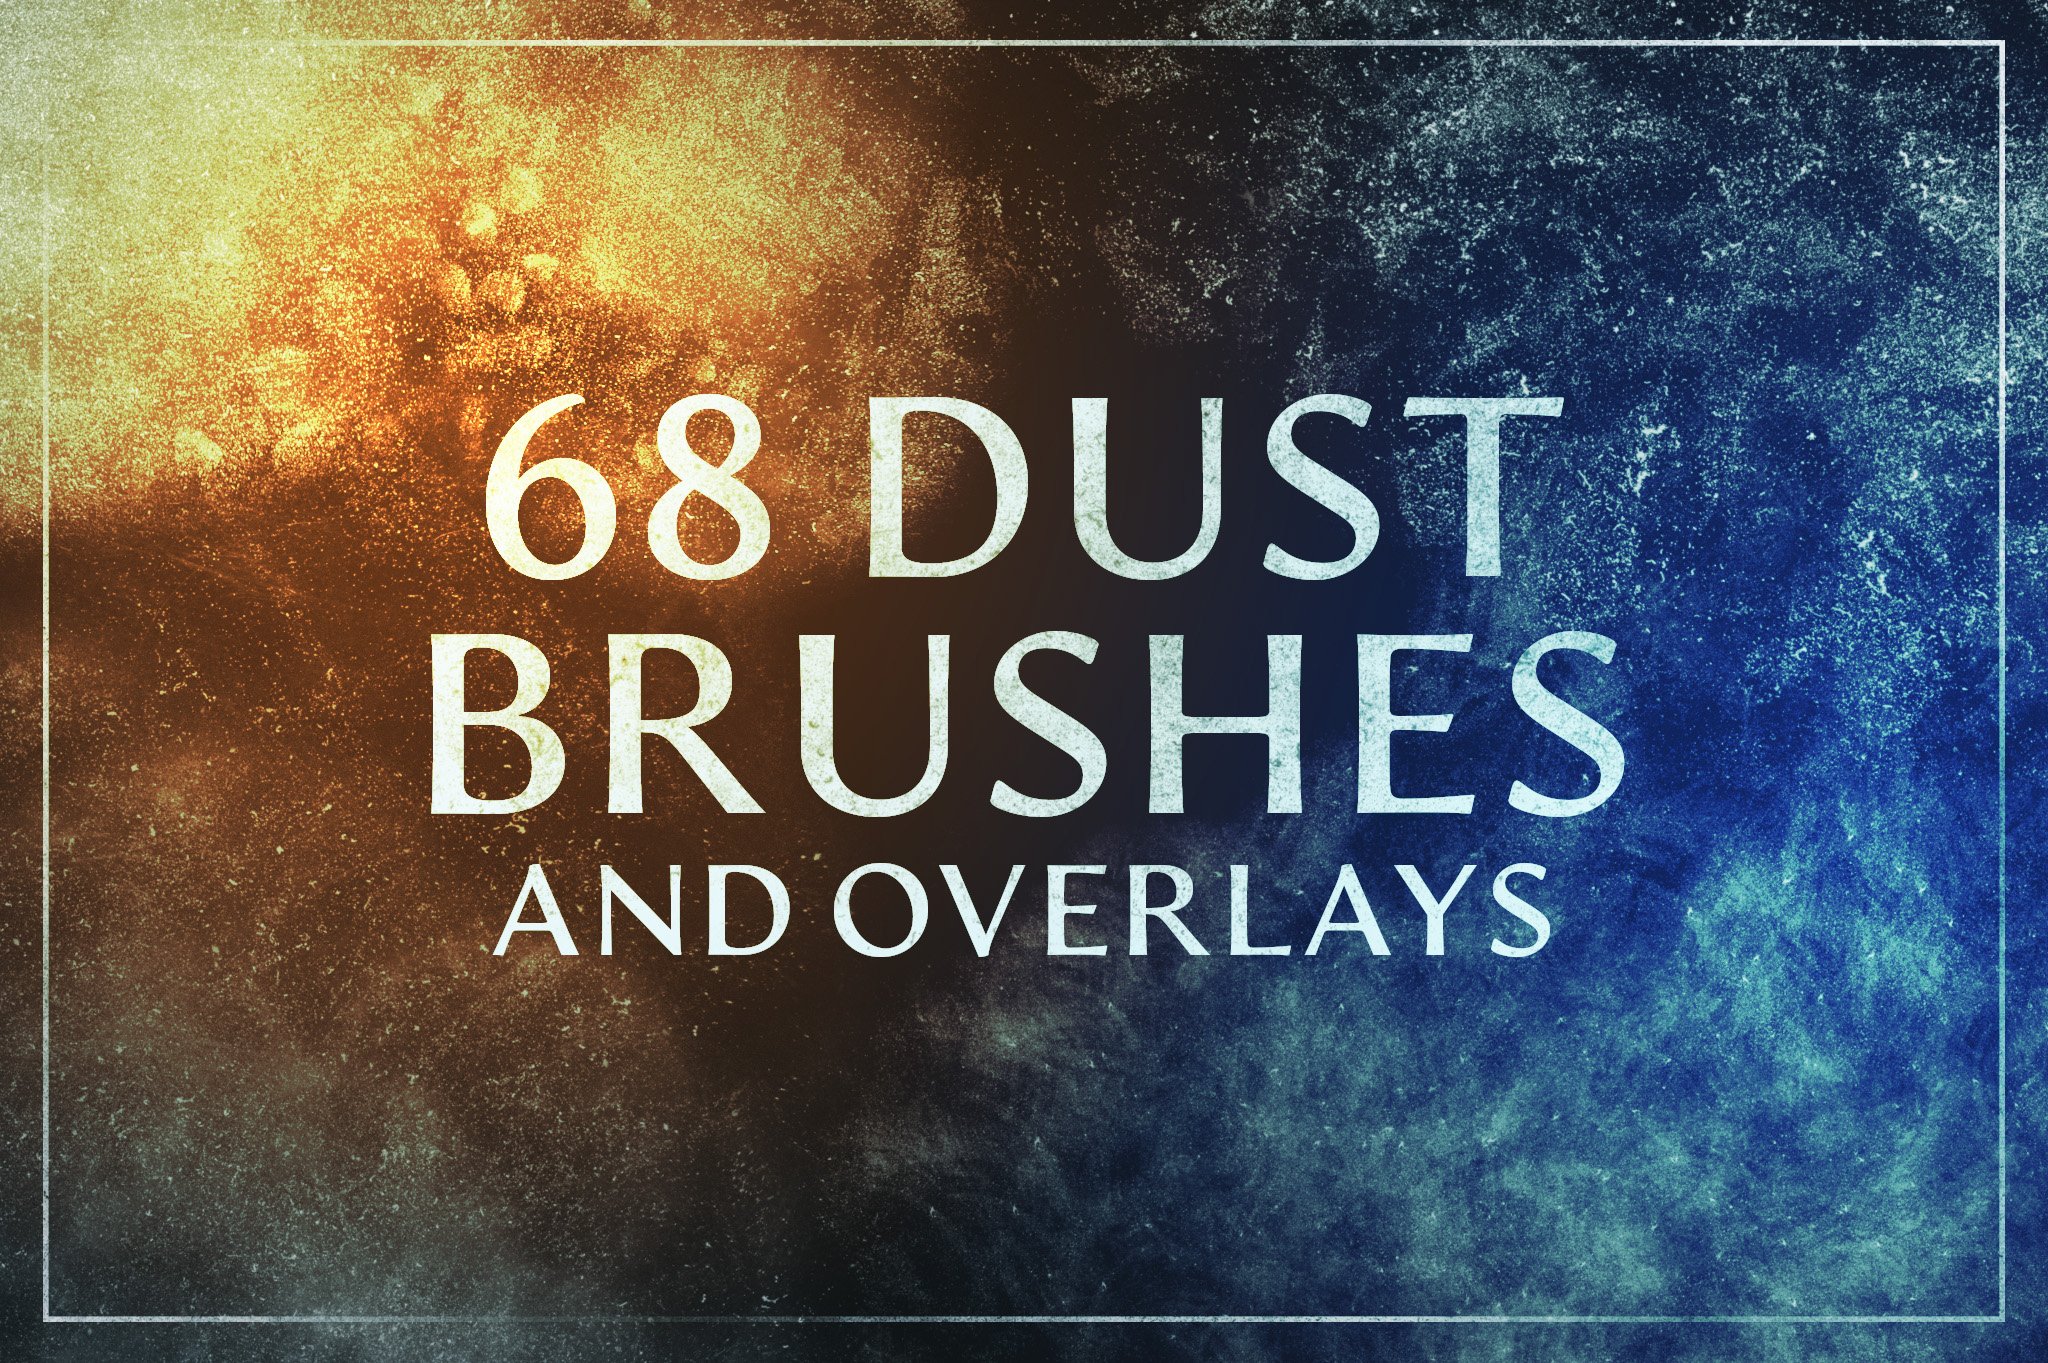 68 Dust Brushes & Overlayscover image.